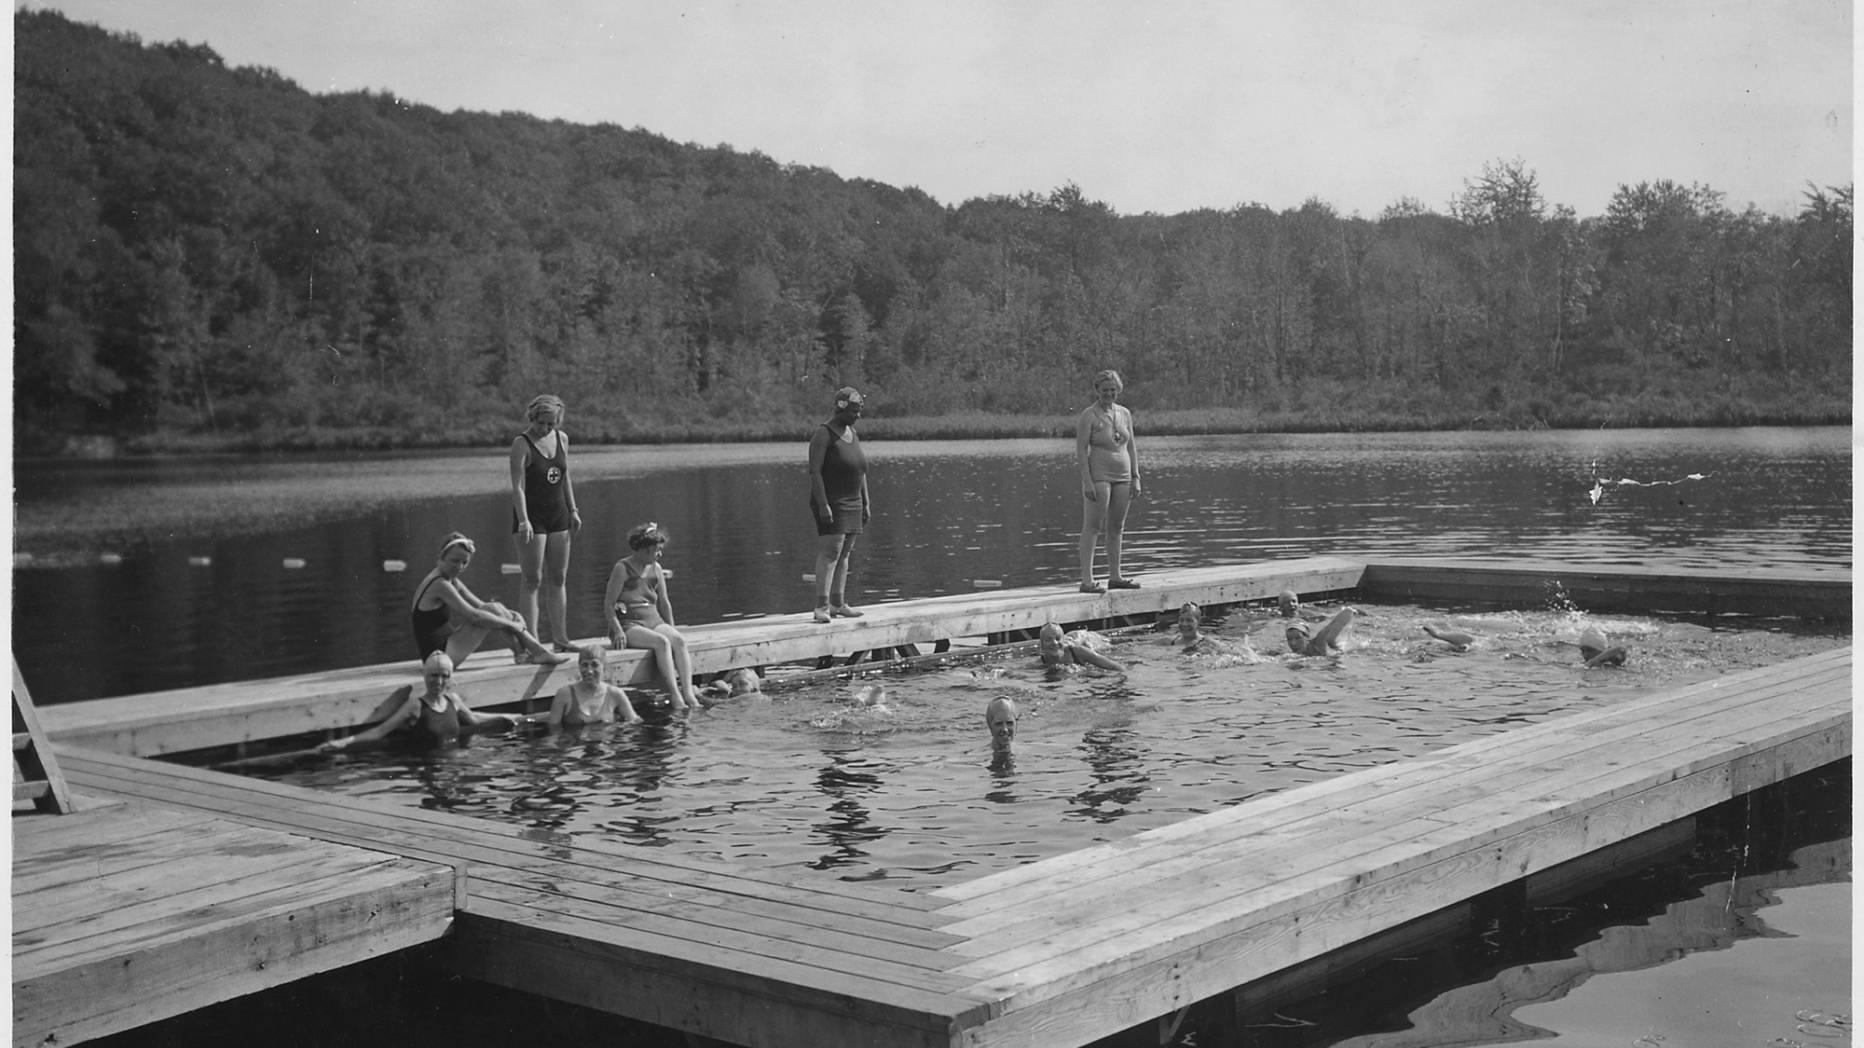 B&W photo of group of people swimming in sectioned of area of lake